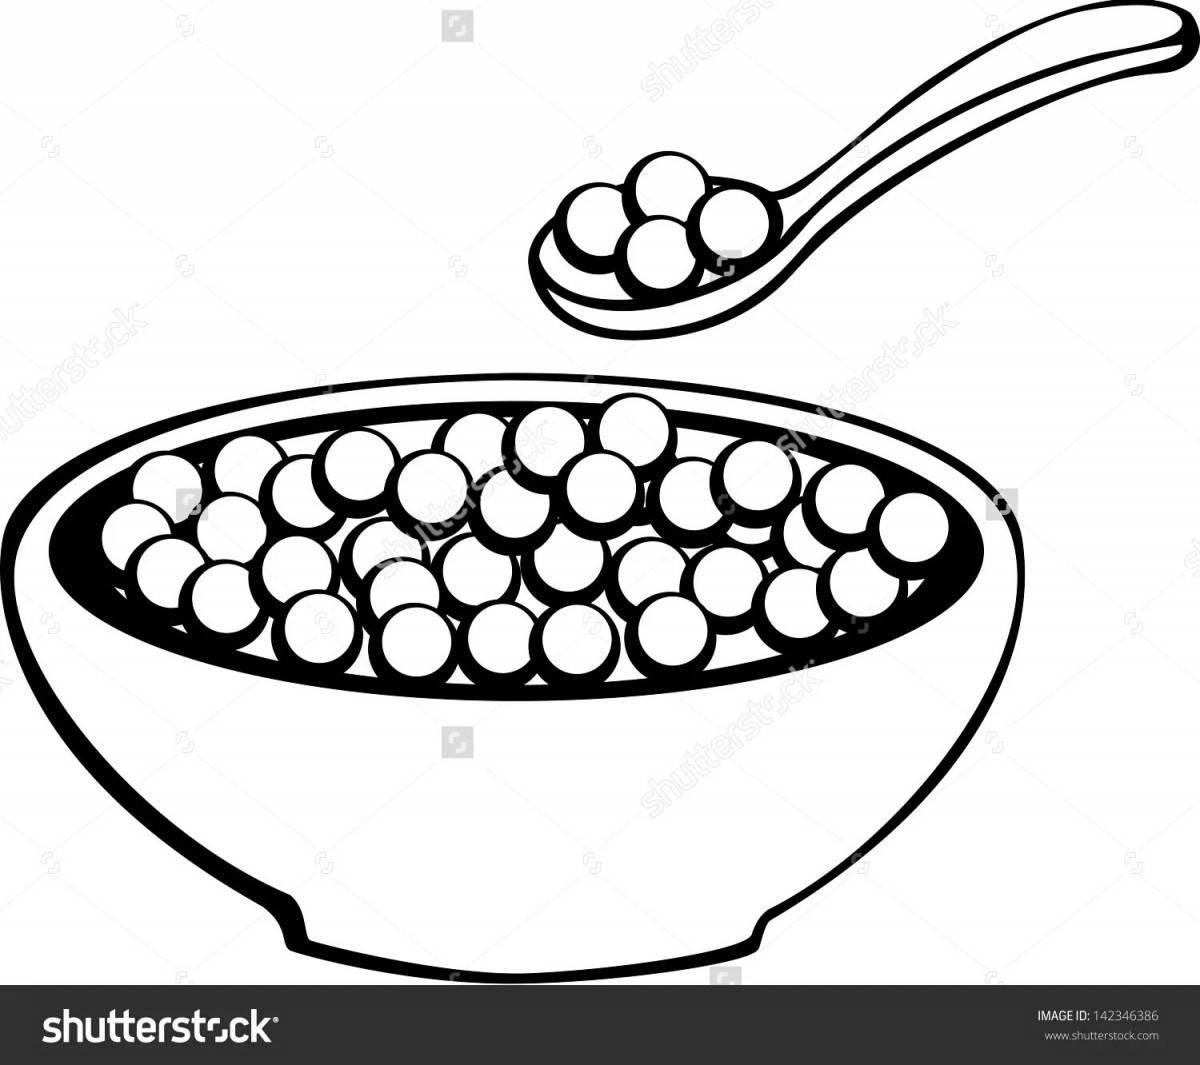 Magic cereal coloring page